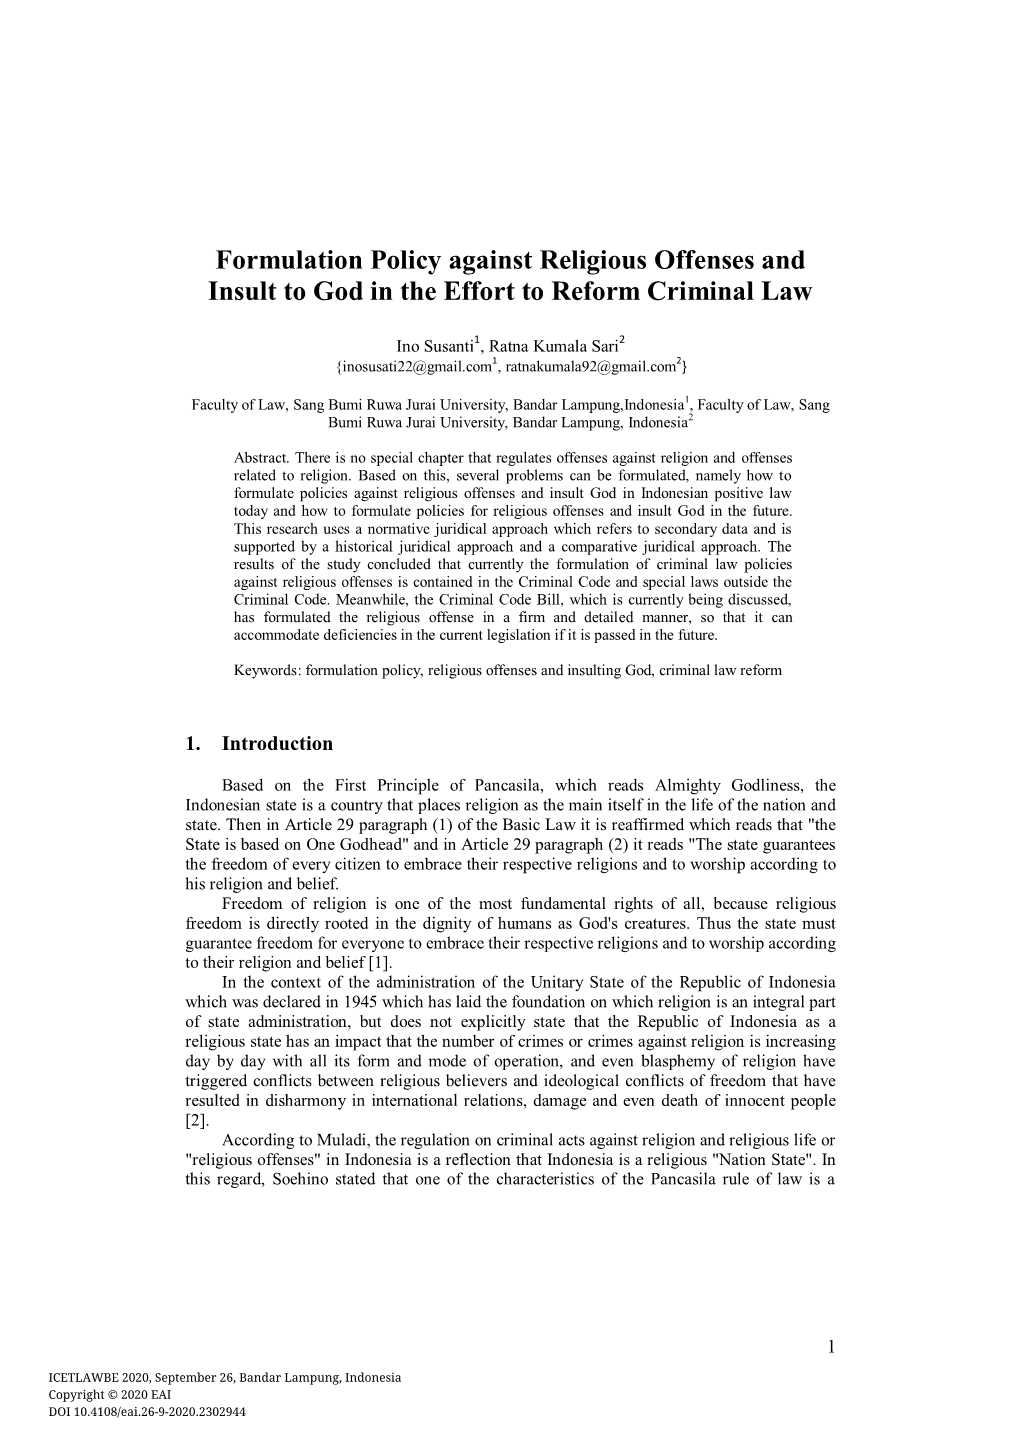 Formulation Policy Against Religious Offenses and Insult to God in the Effort to Reform Criminal Law